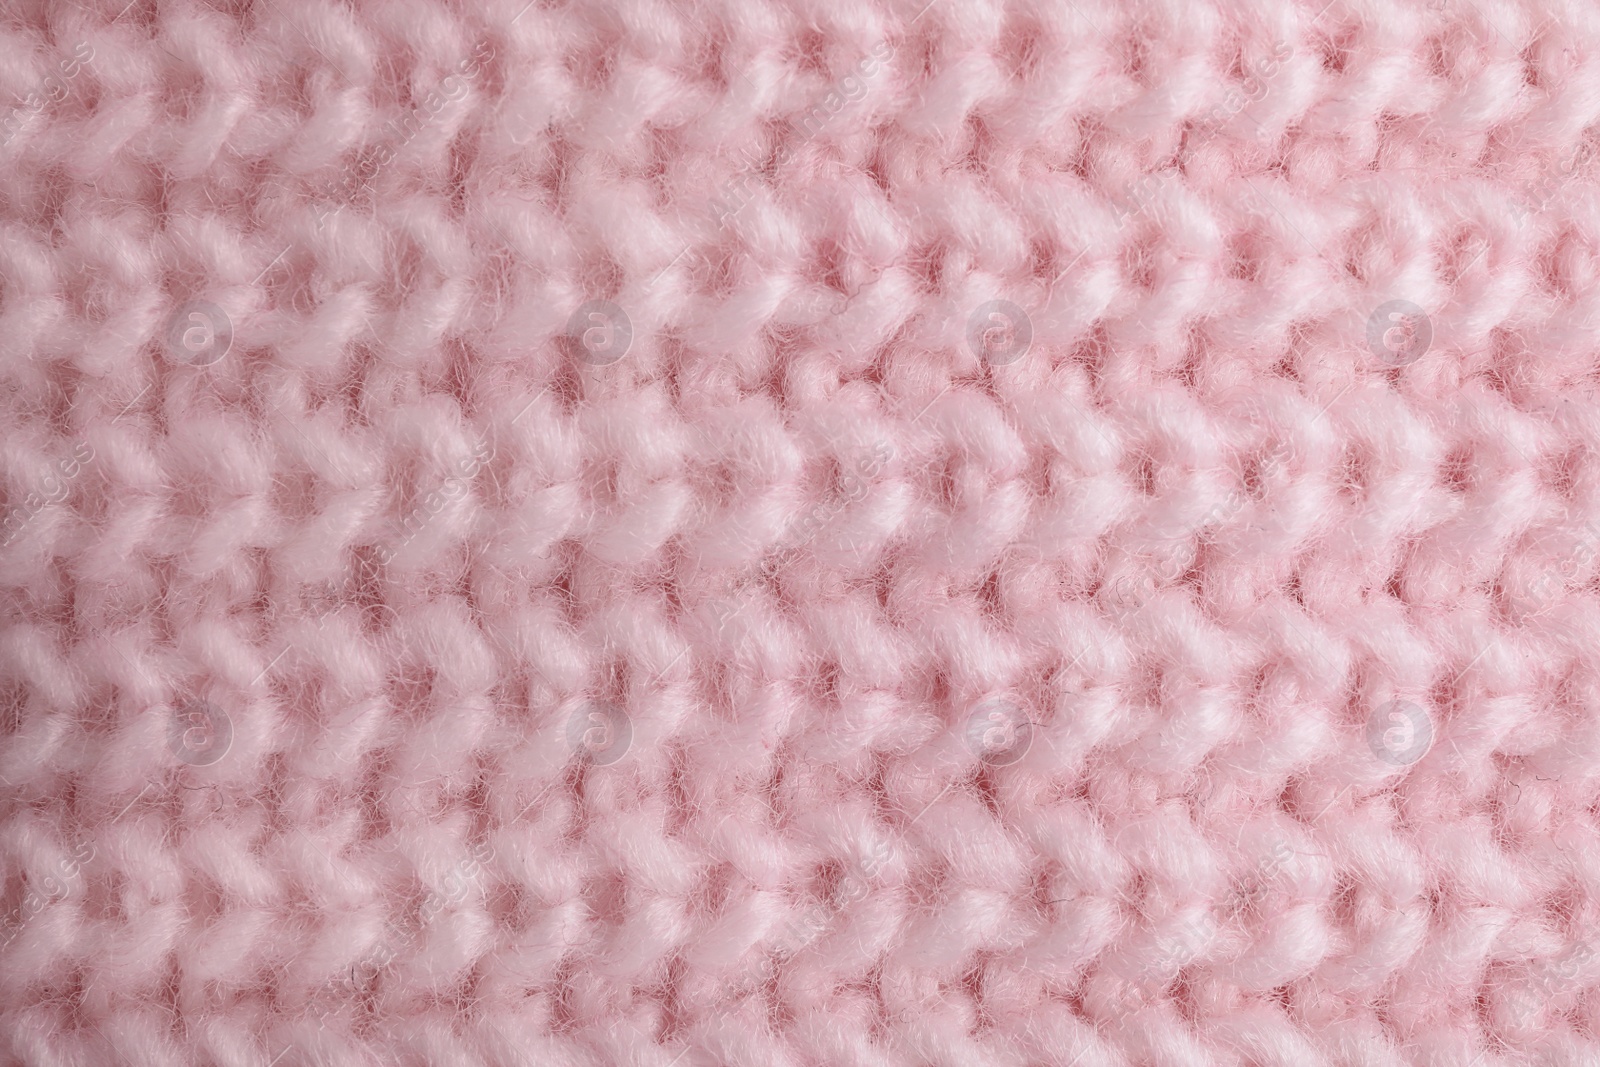 Photo of Pink knitted sweater as background, closeup view